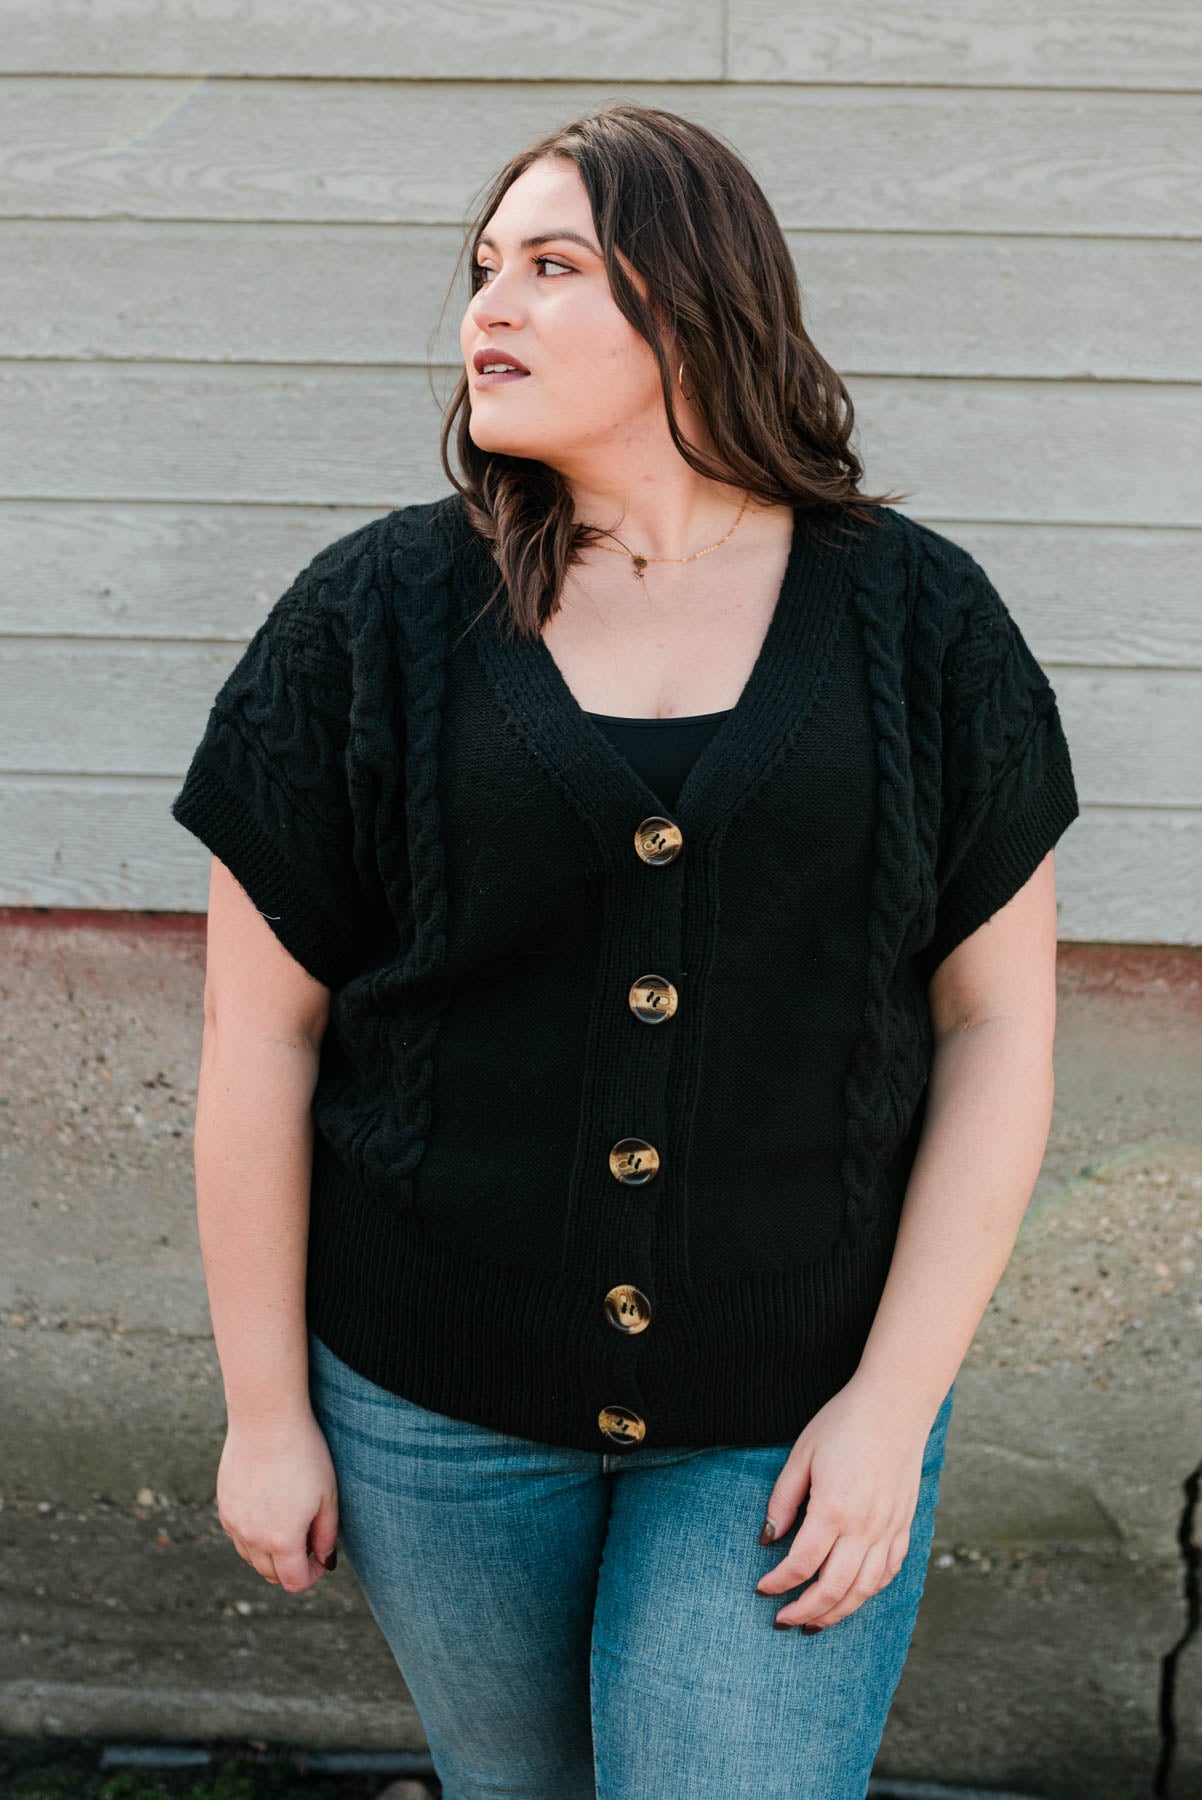 Short sleeves plus size black knit cardigan with buttons